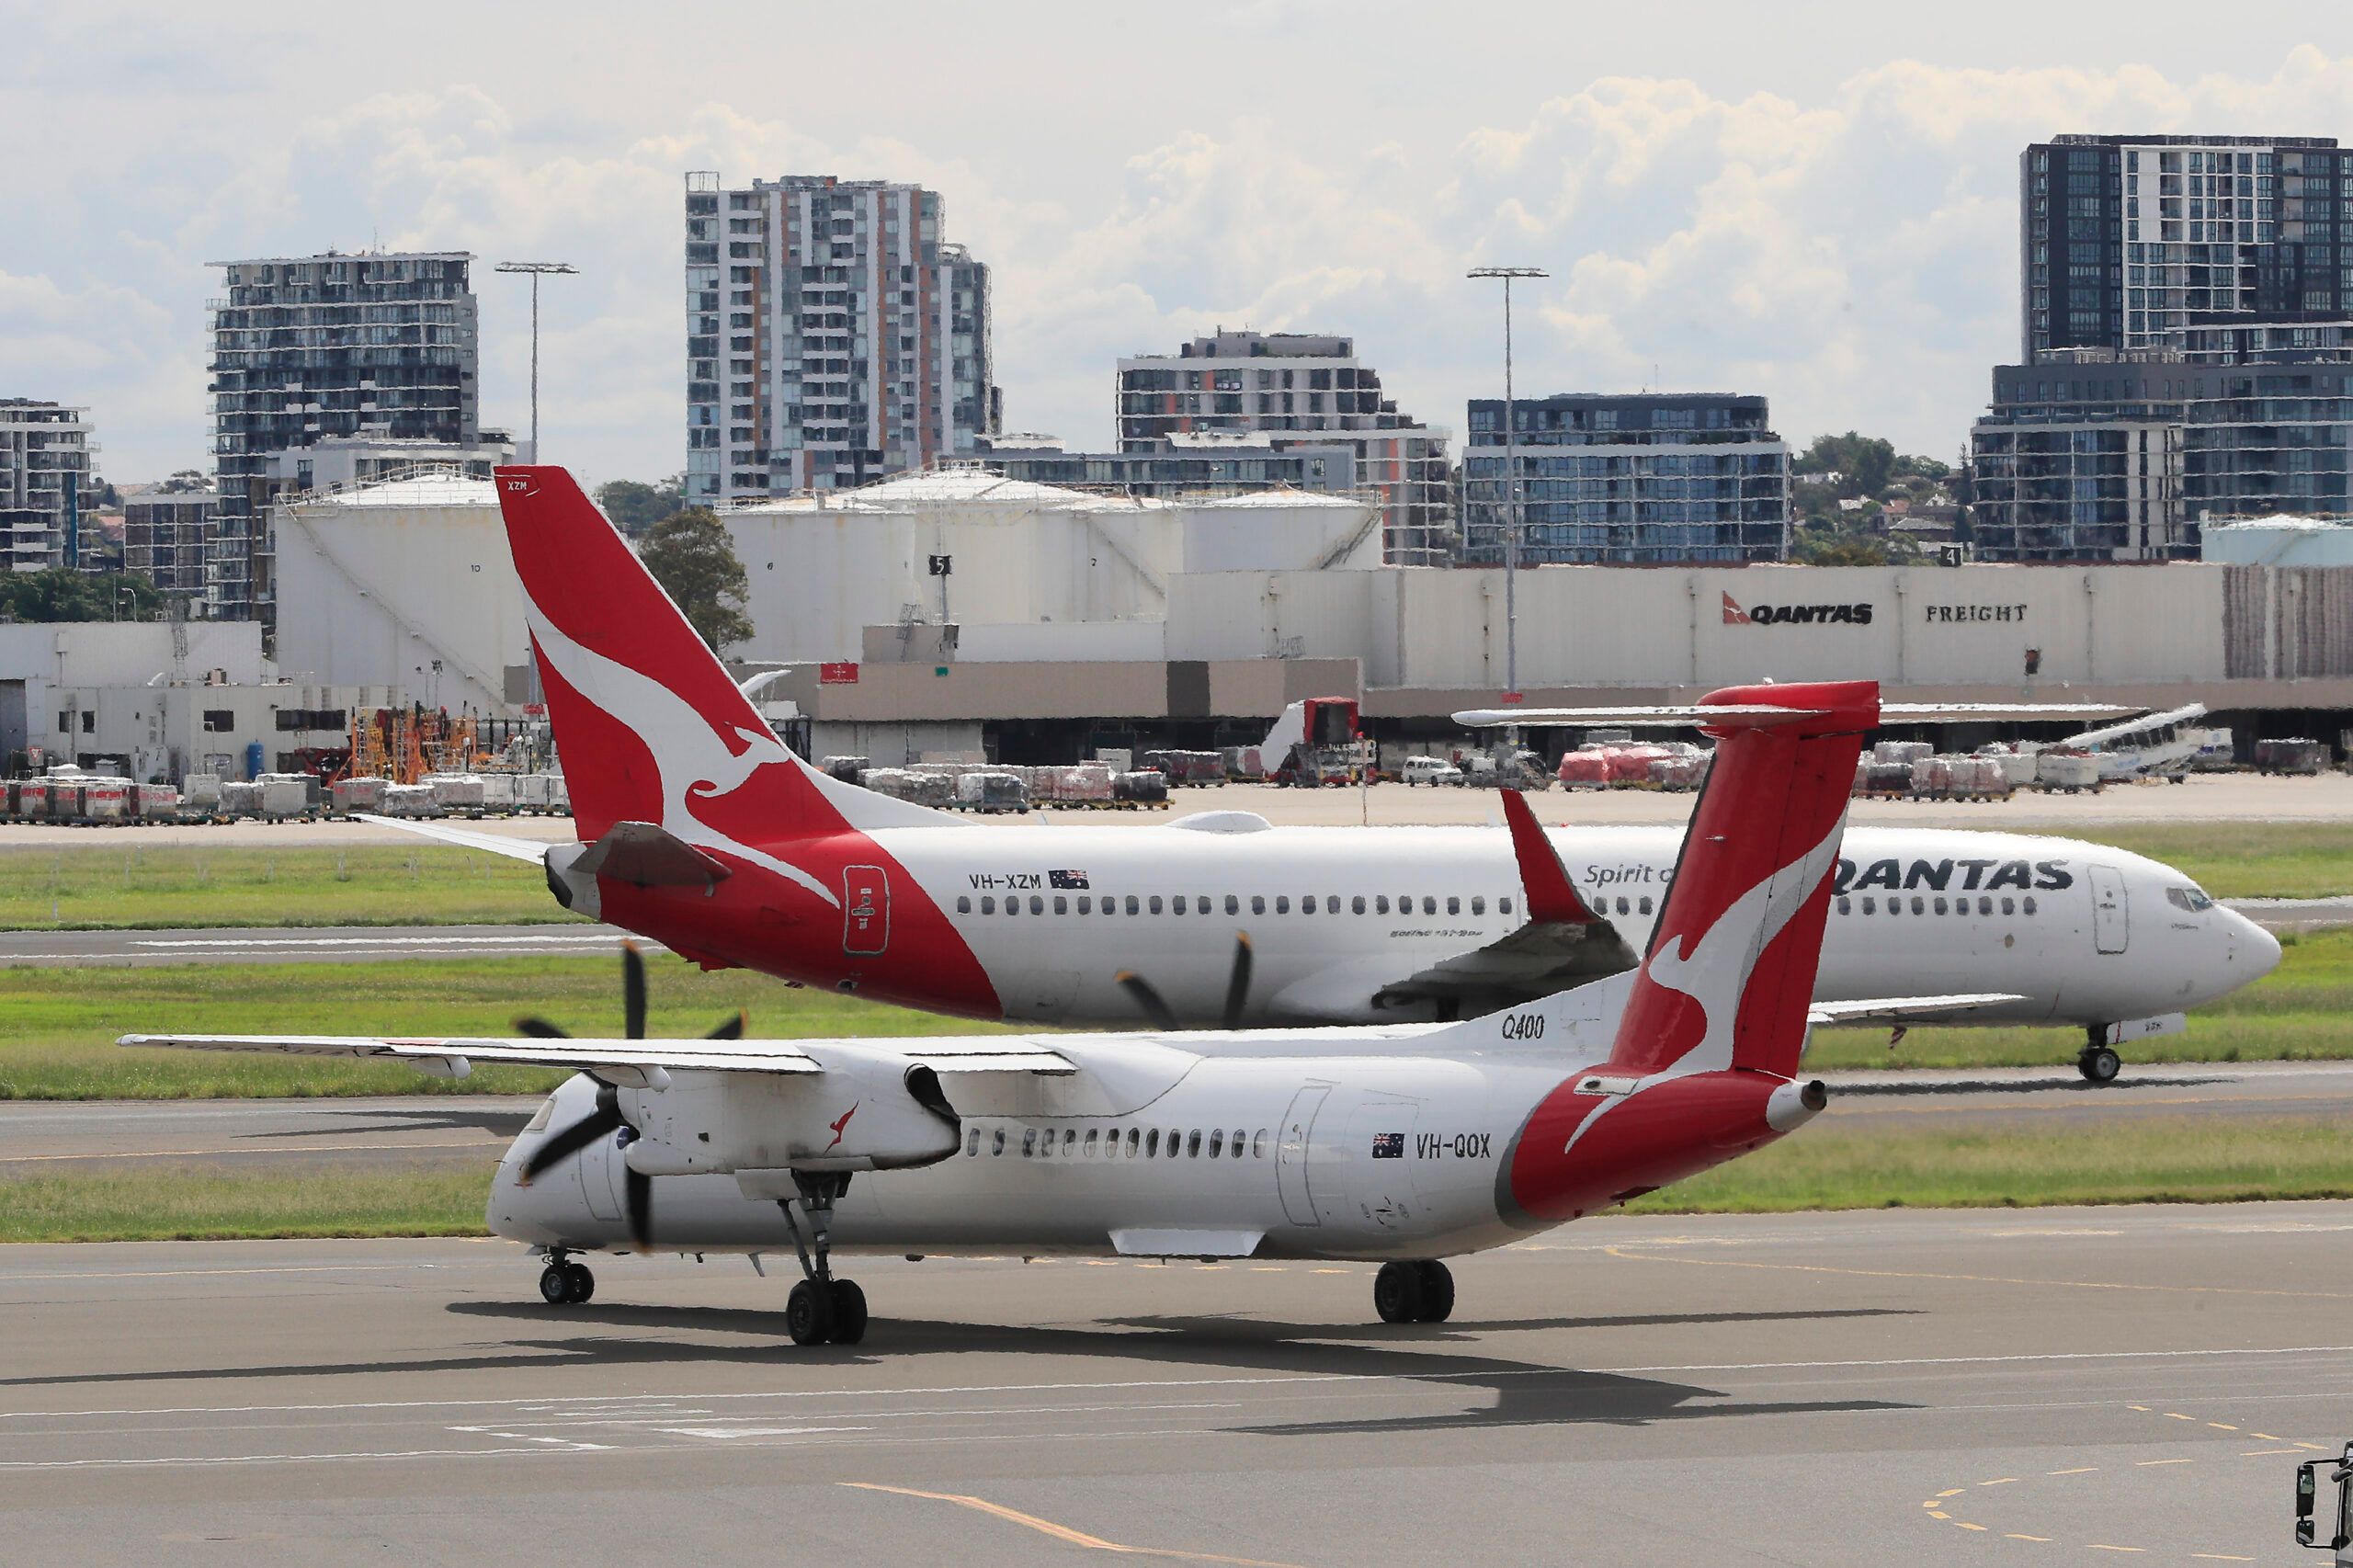 Qantas is enticing travelers to book using their points by offering points planes